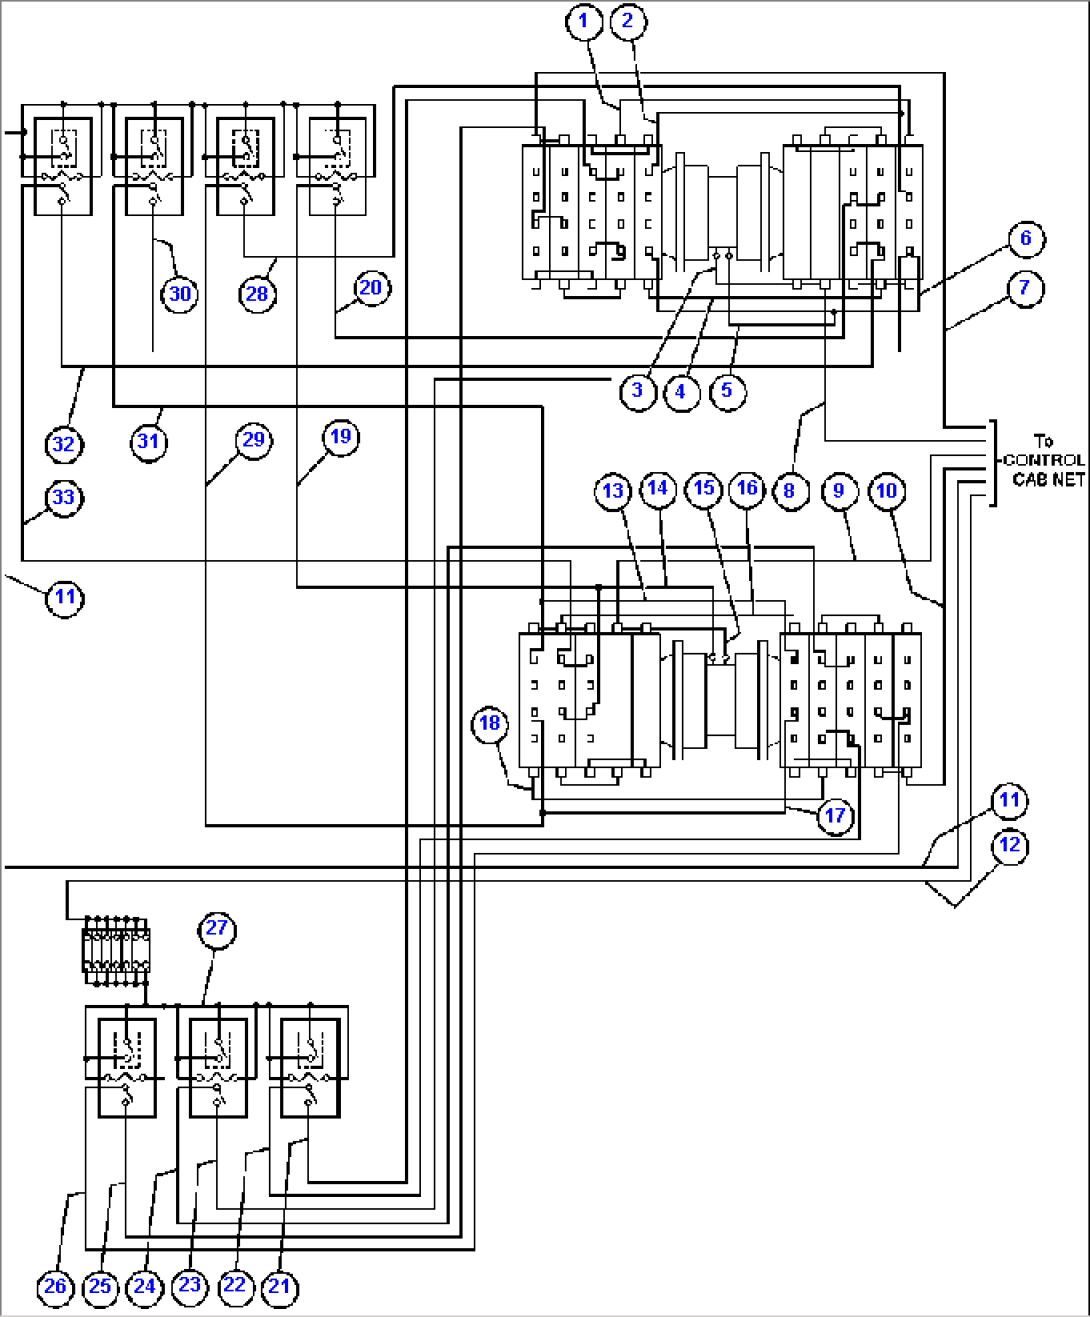 ELECTRIC POWER COMPONENTS WIRING - 1